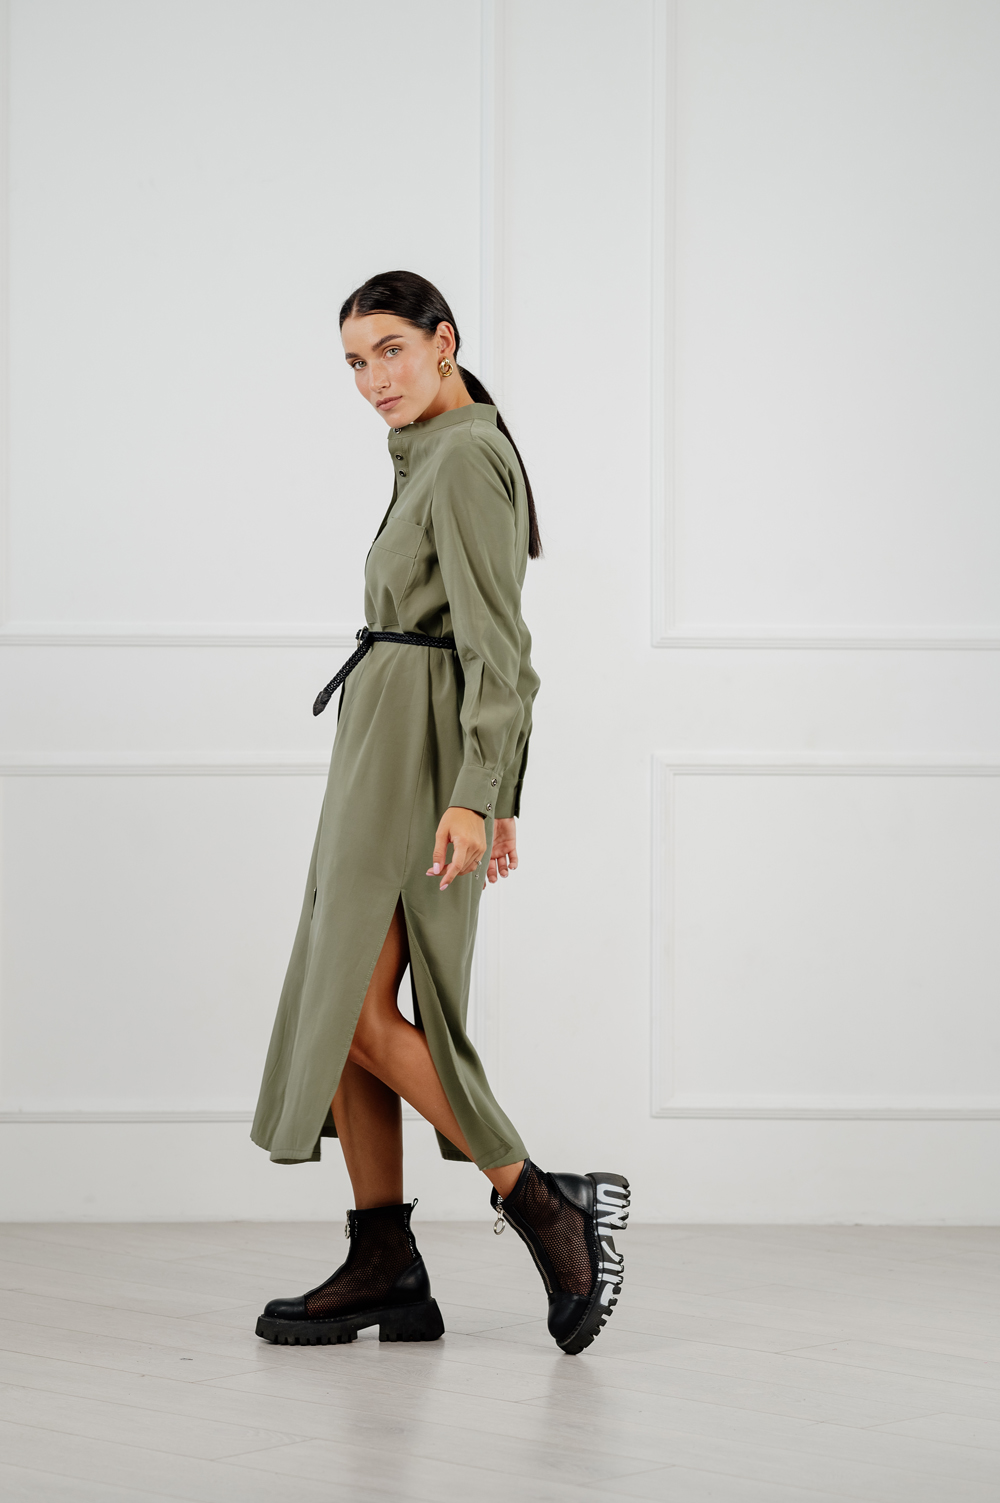 Loose cut dress in a bright on-trend khaki shade